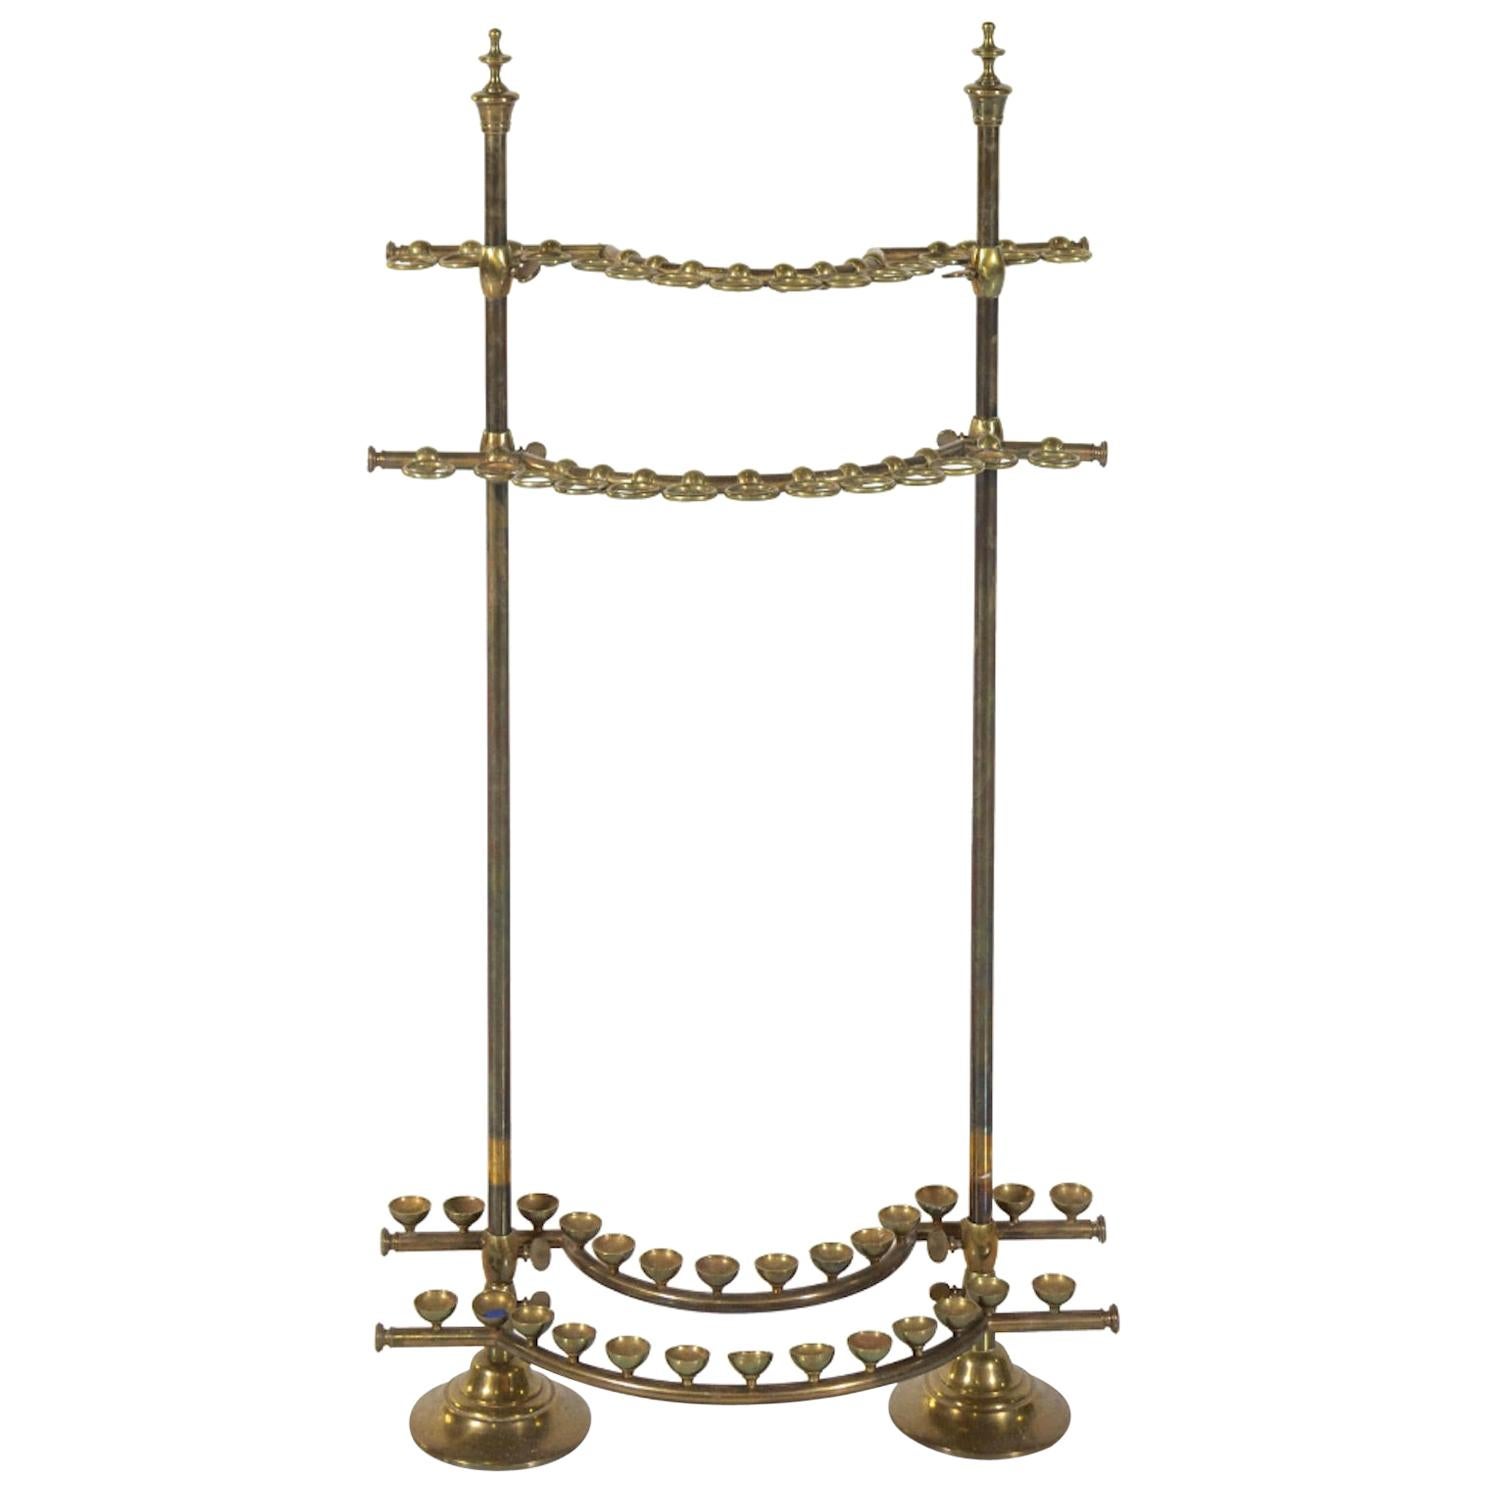 Rare English Brass Cane Stand 19th Century, Shown with the Colletion of Canes